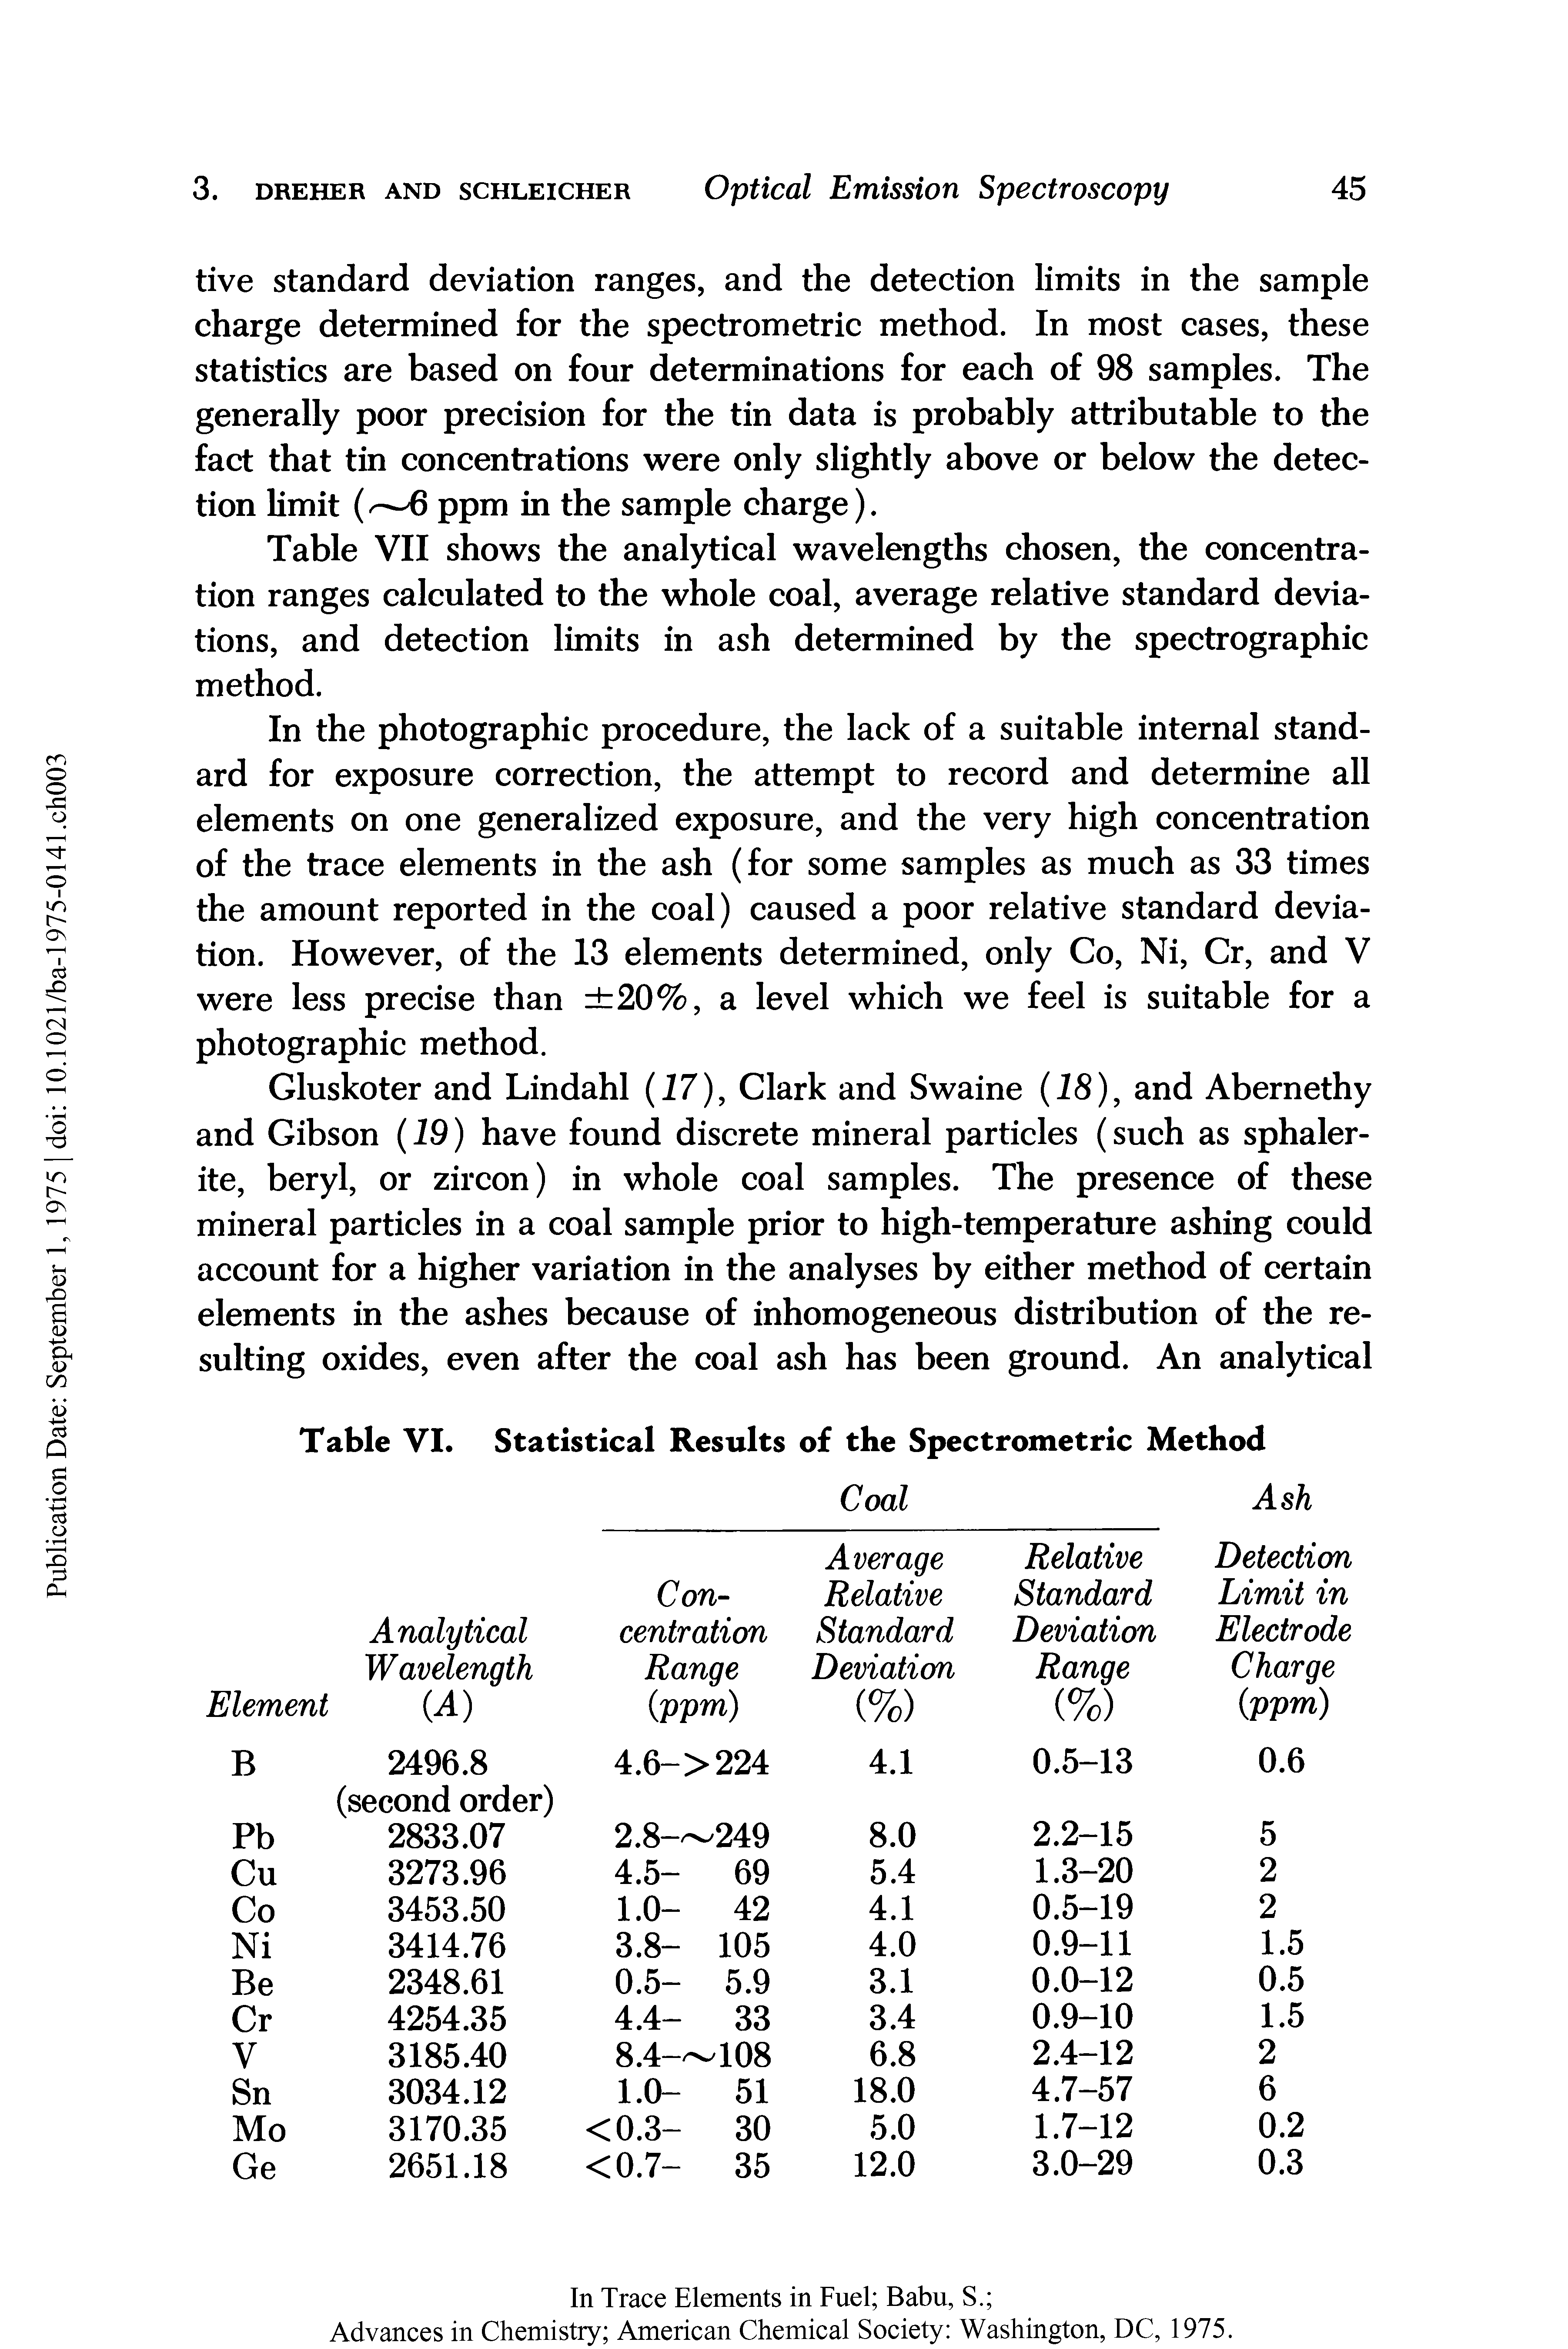 Table VII shows the analytical wavelengths chosen, the concentration ranges calculated to the whole coal, average relative standard deviations, and detection limits in ash determined by the spectrographic method.